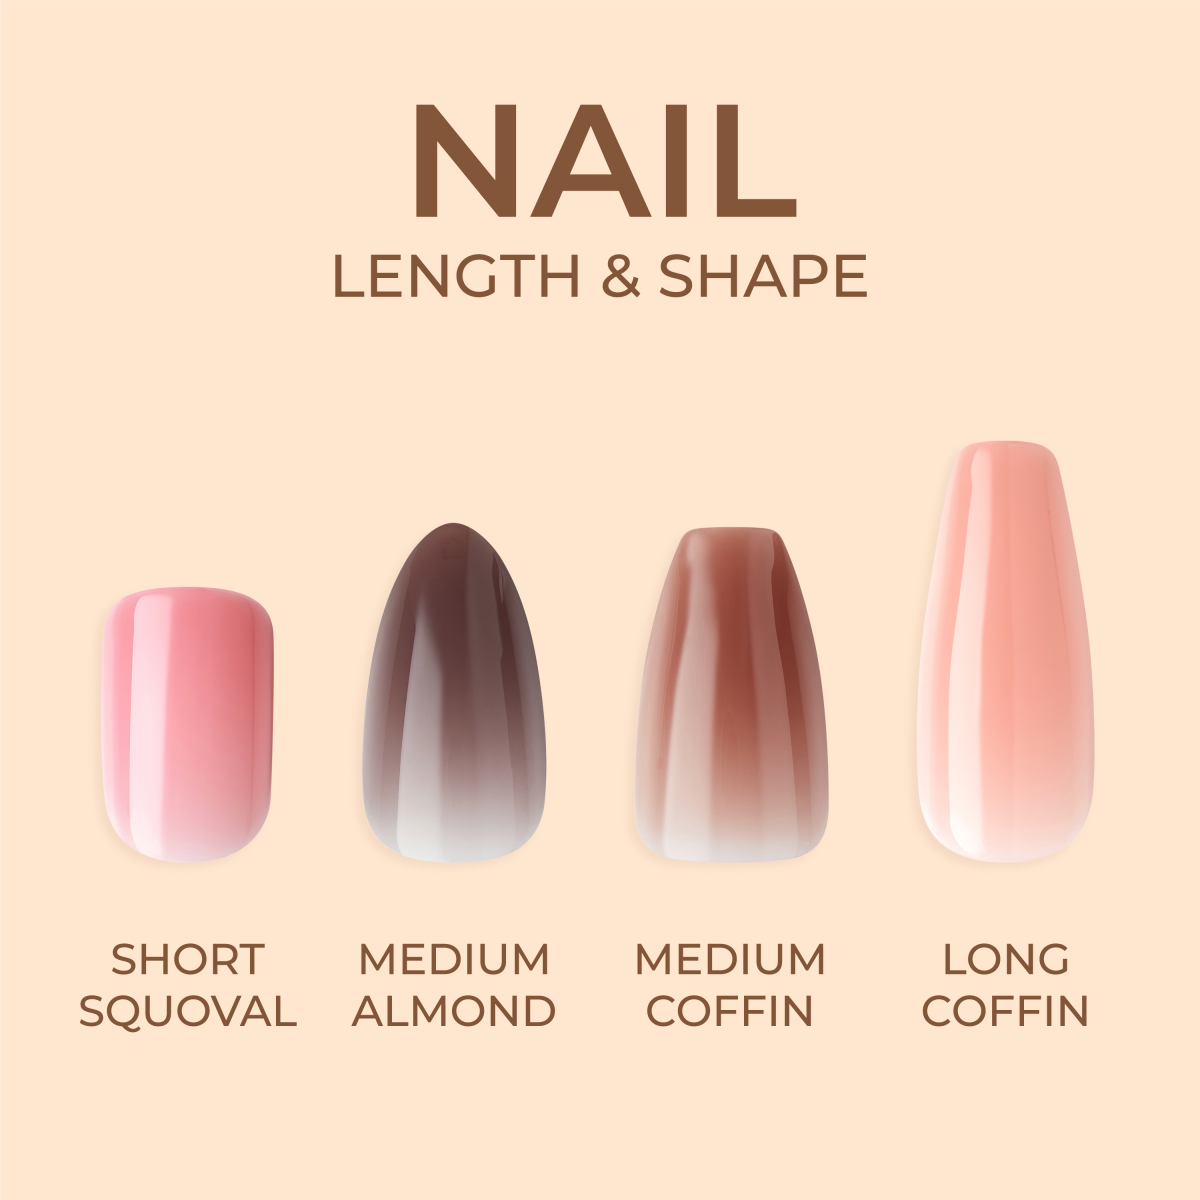 KISS Bare but Better Sculpted Nails - Nude Drama